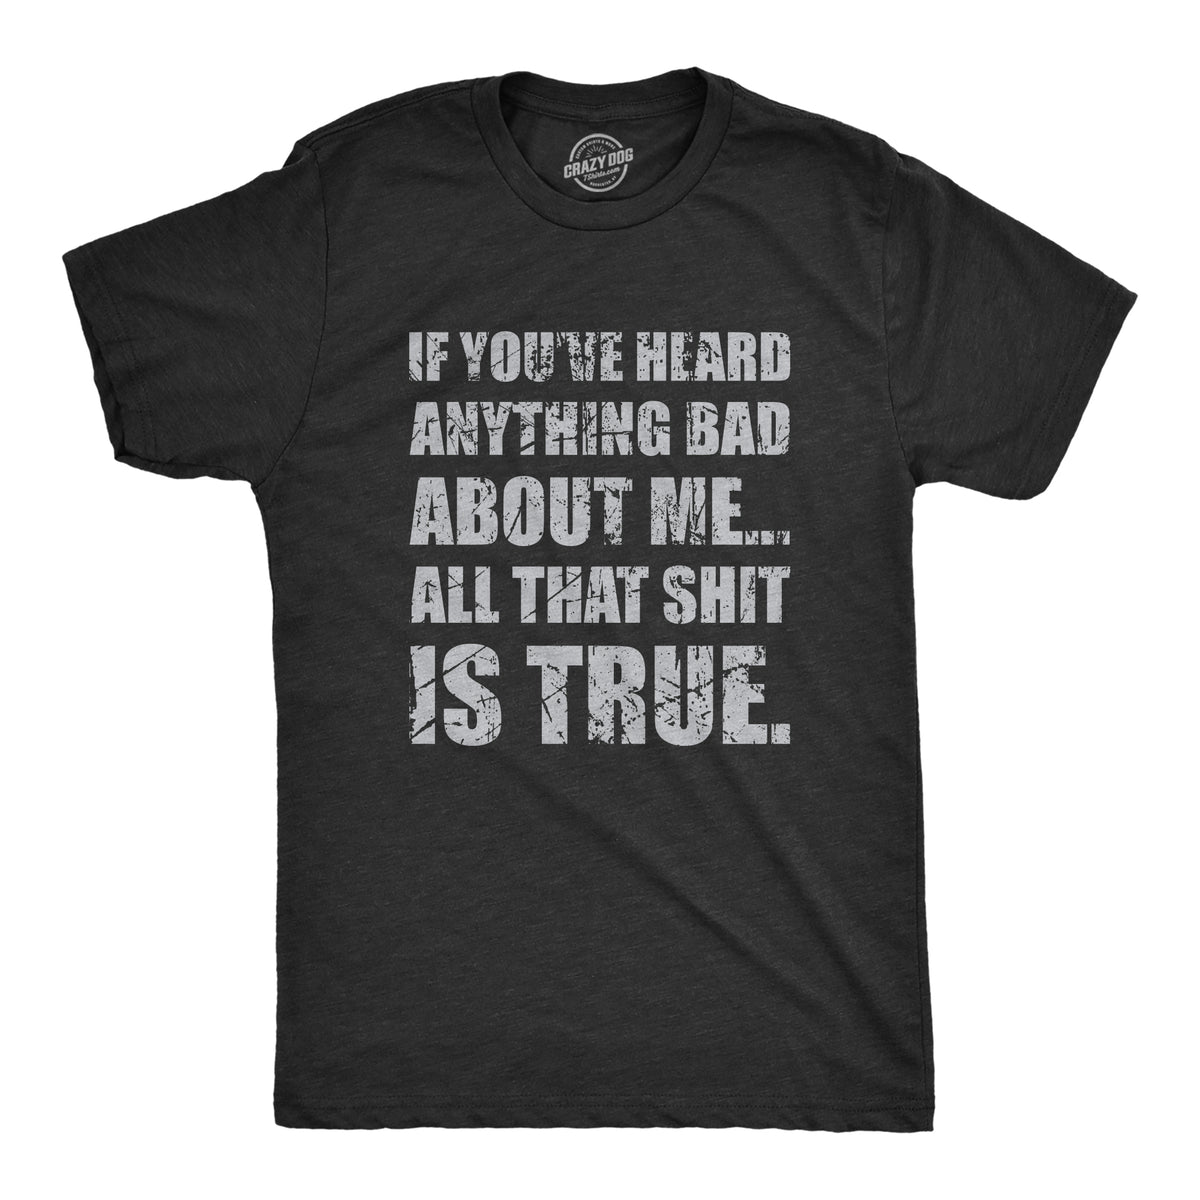 Funny Heather Black - HEARD If You’ve Heard Anything Bad About Me Mens T Shirt Nerdy Sarcastic Tee